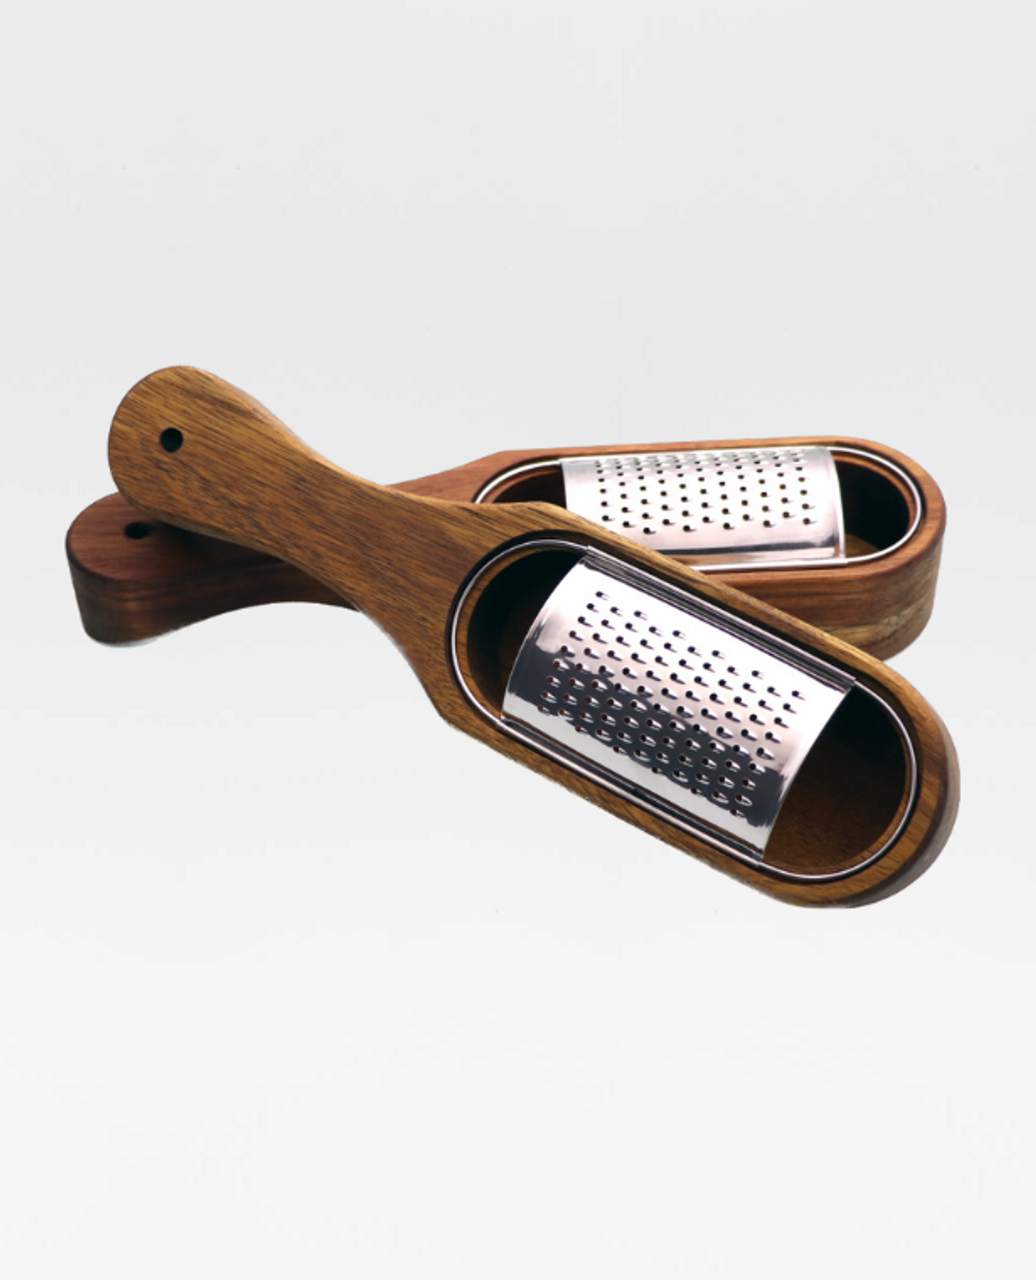 Cheese Grater, 304 Stainless Steel Cheese Graters Shredder